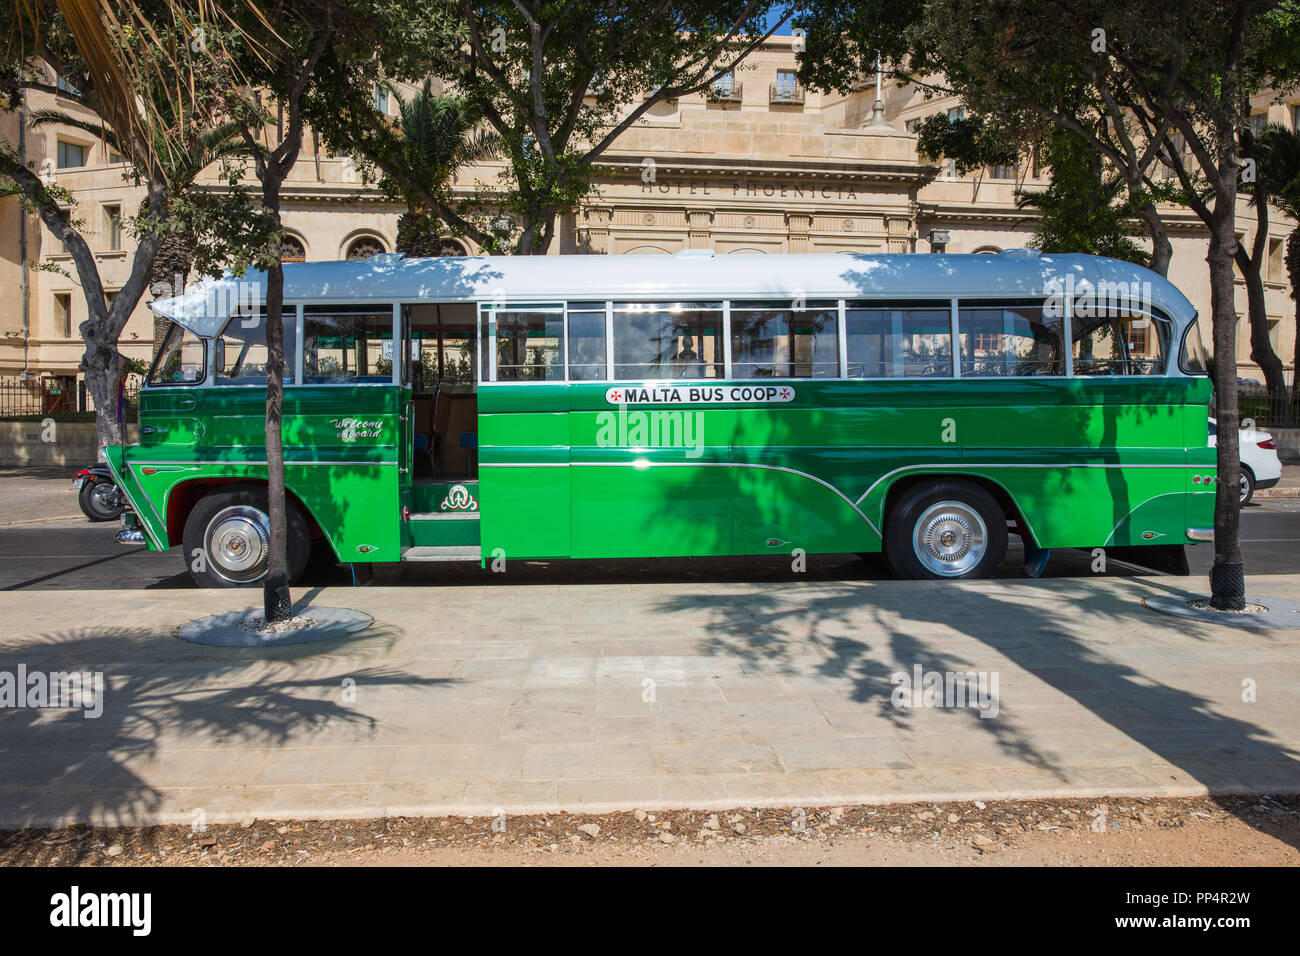 City Valleta, Malta, Europe. City streets and  urban view. Green bus, peoples and architecture. Travel photo 2018 september. Stock Photo